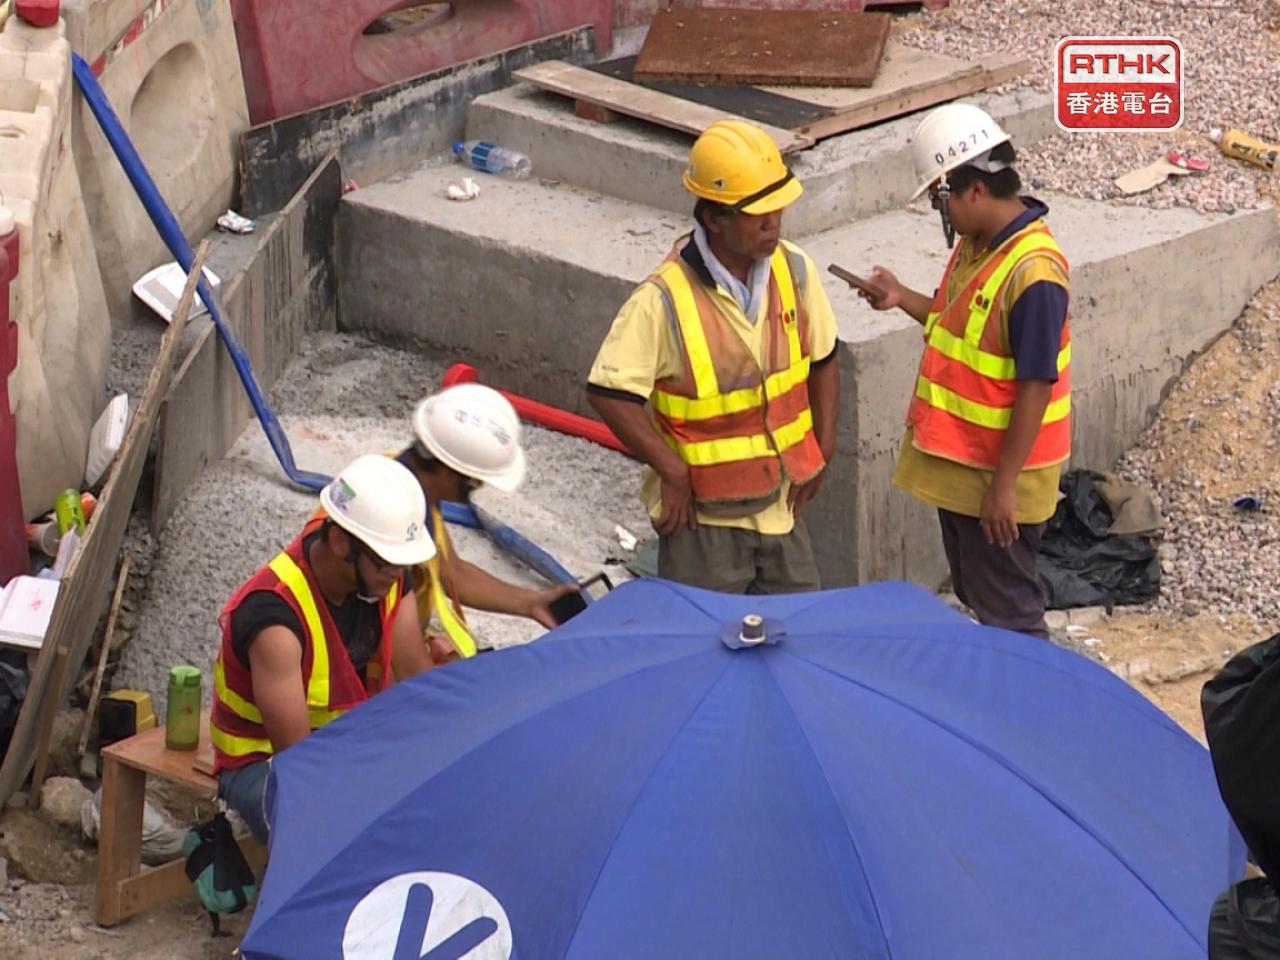 Govt to adopt new heatstroke rules for outdoor workers